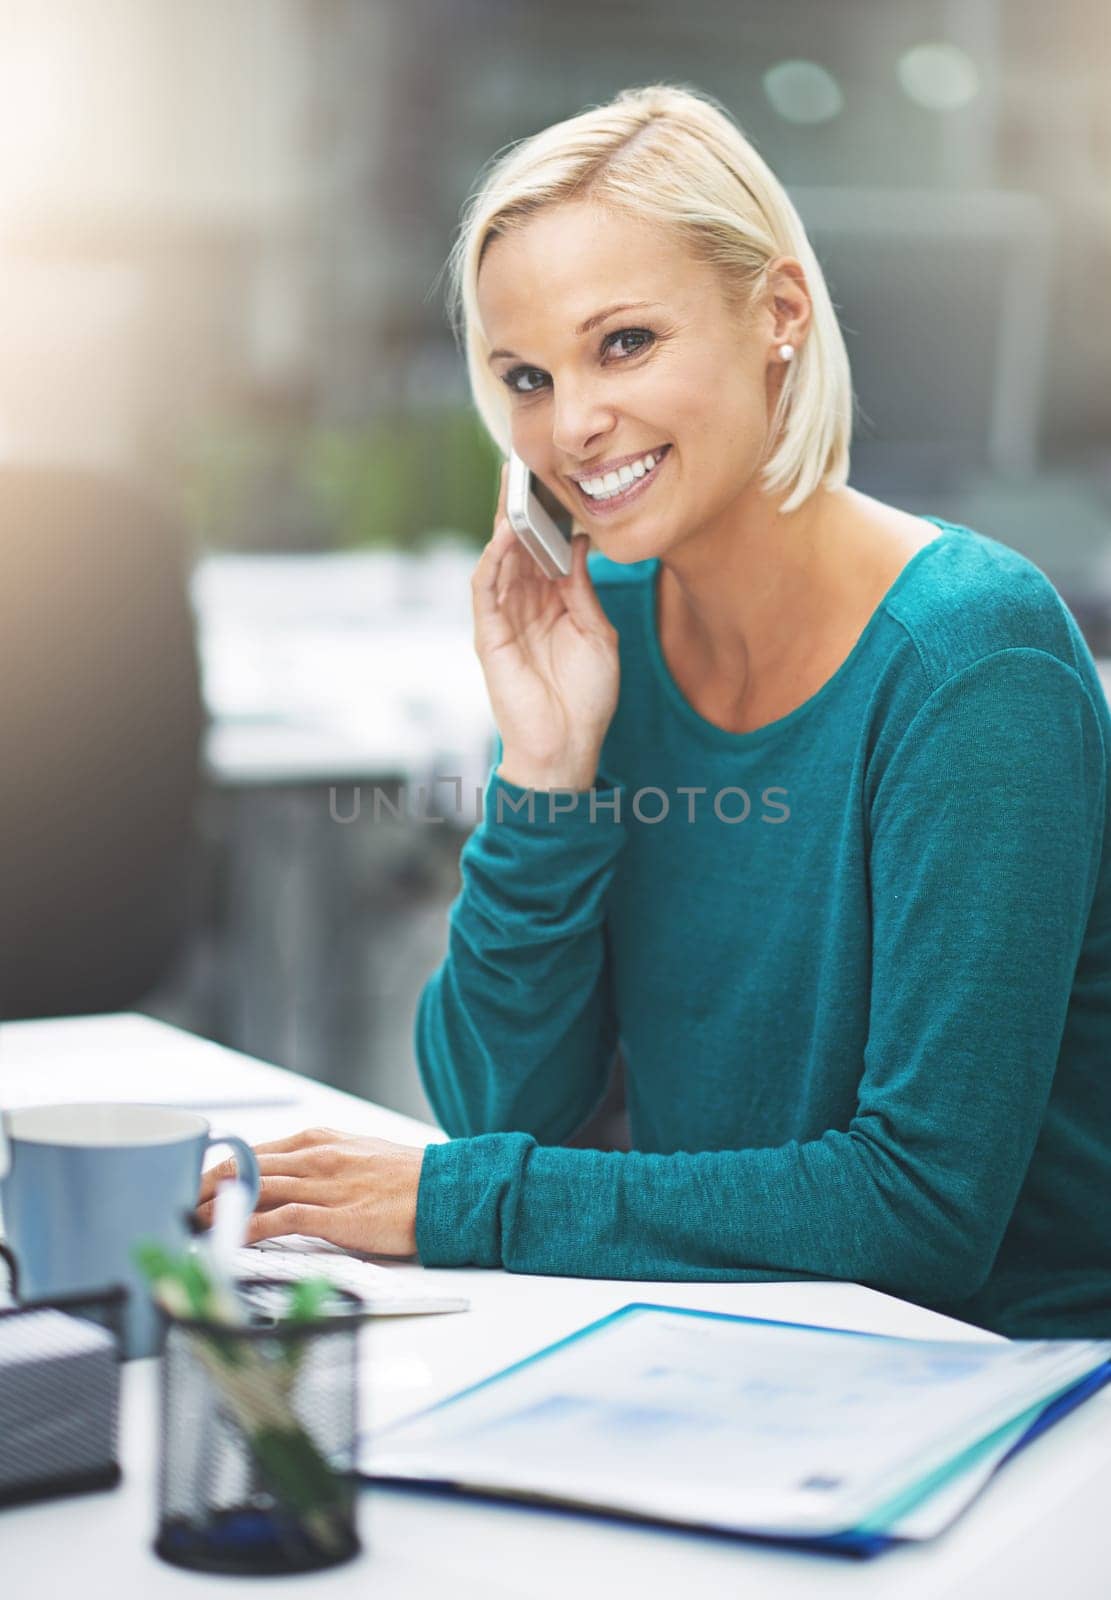 Woman, cell phone call and portrait in office with smile for networking, deal or negotiation. Business person, smartphone and happy for conversation, communication or mobile connection in workplace.